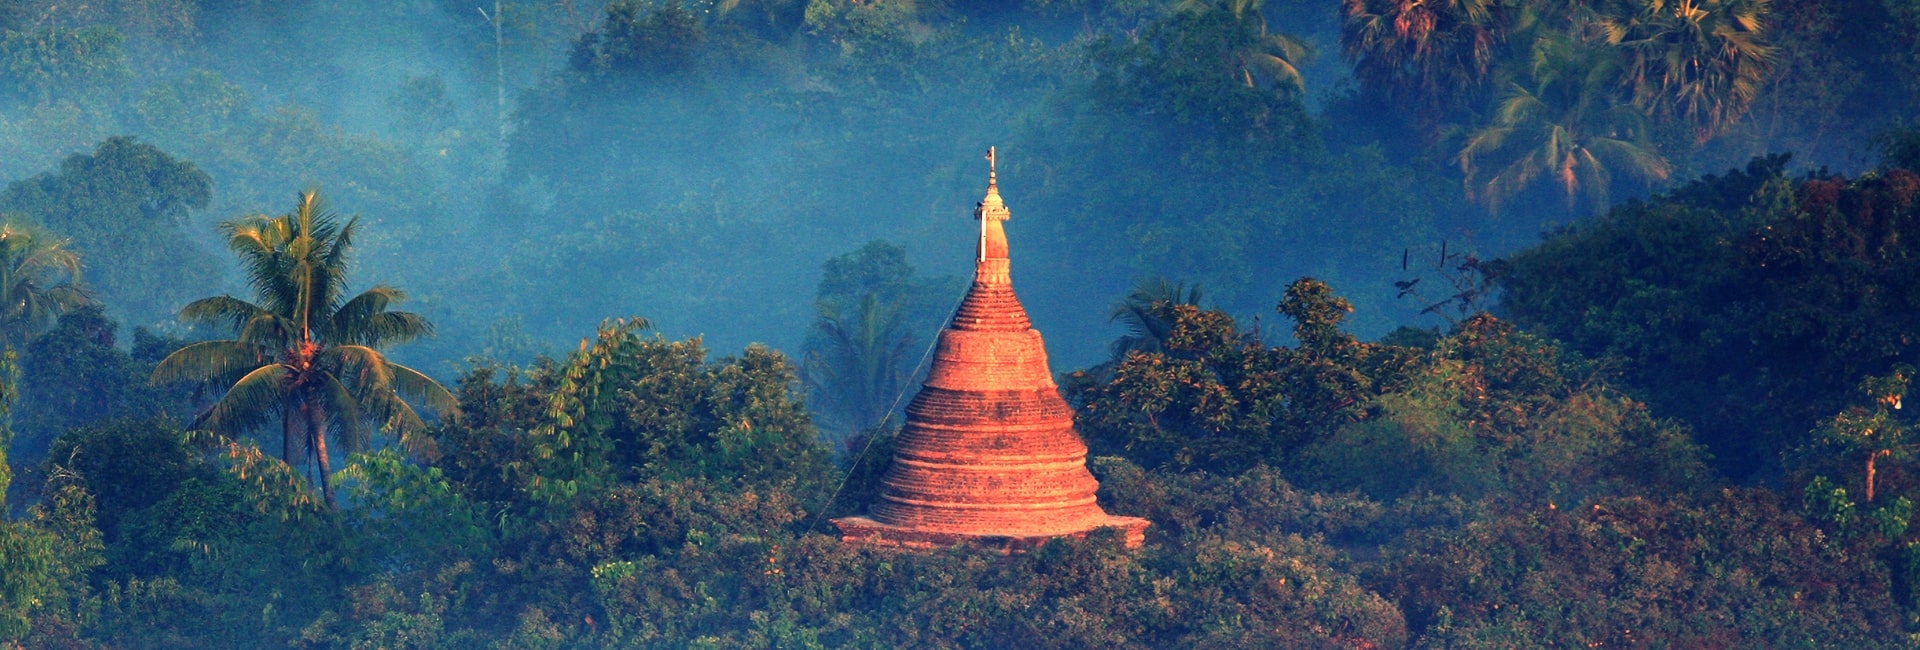 Mrauk U Travel - When to visit - What to see & do - Where to stay